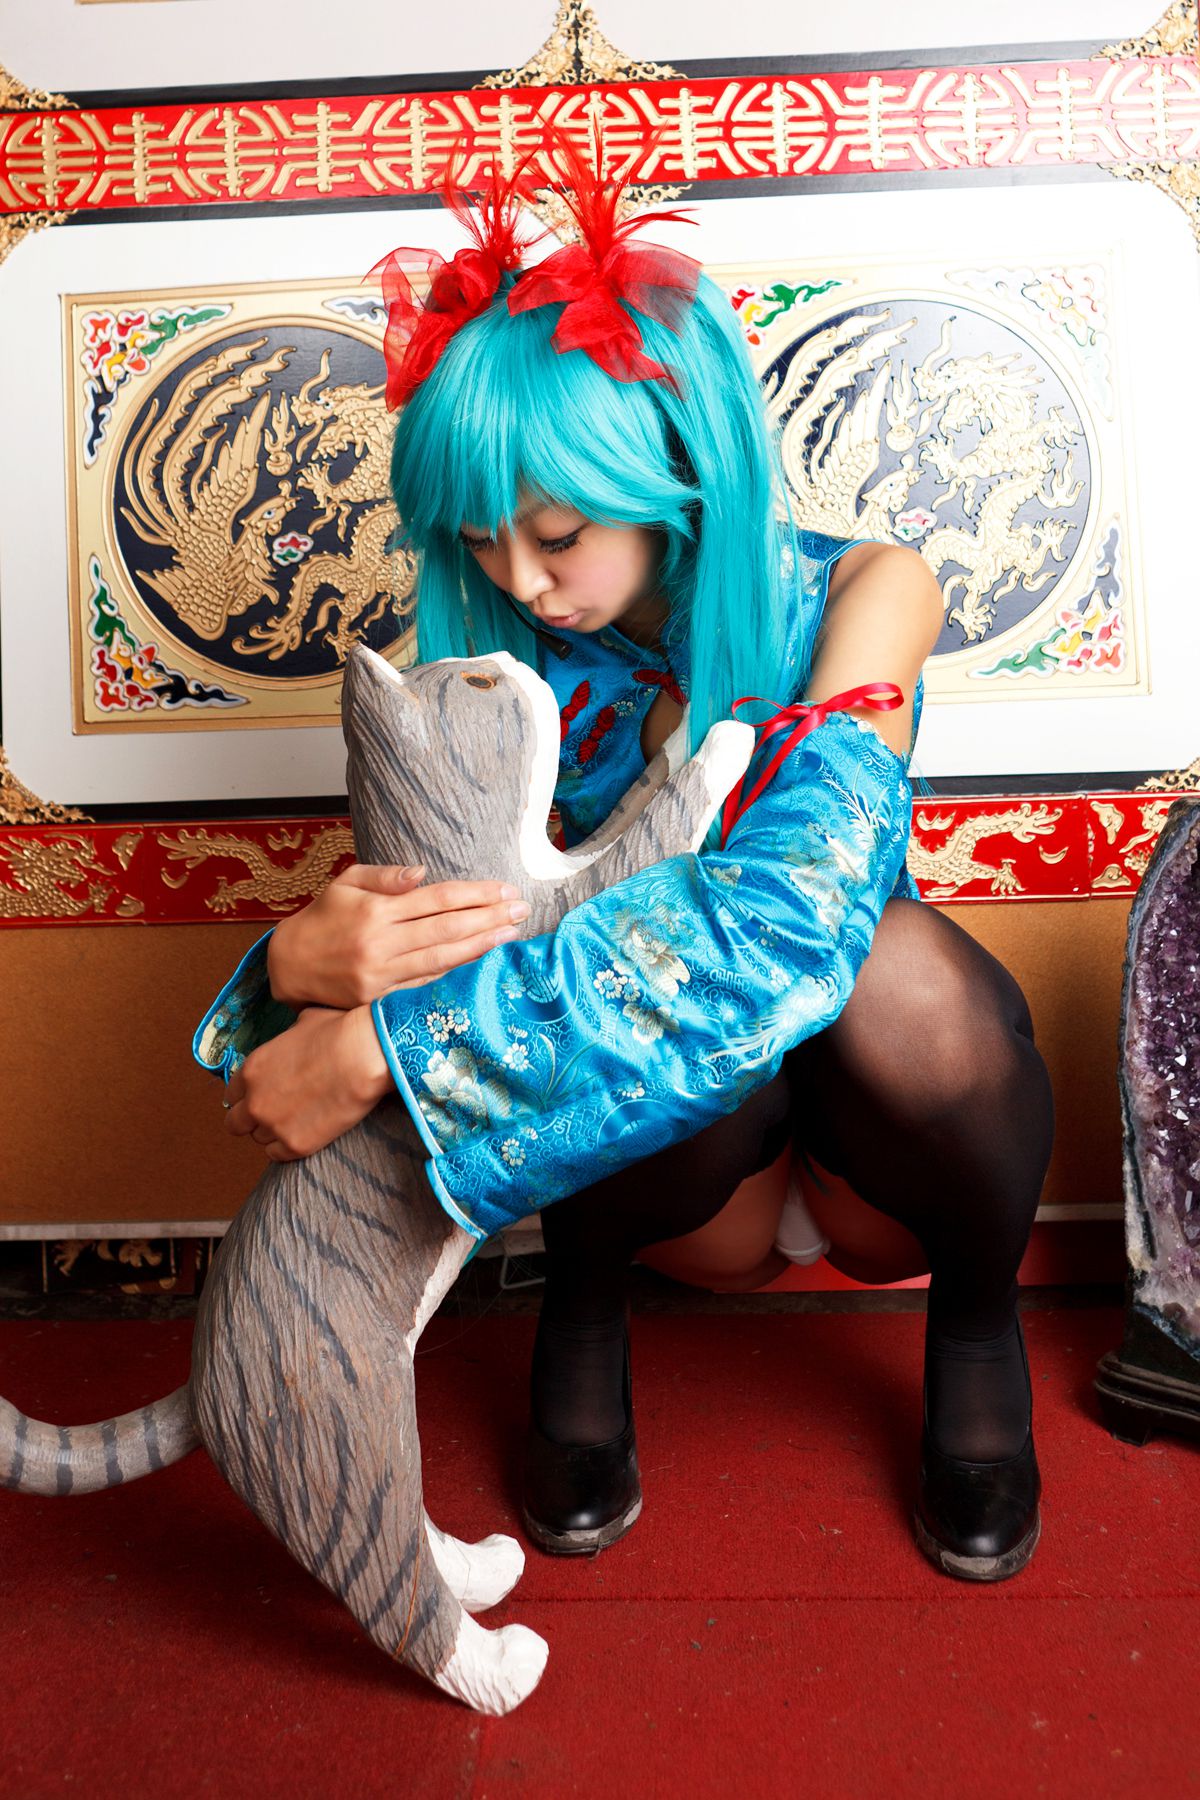 taotuhome[Cosplay] Necoco as Hatsune Miku from Vocaloid 套图第38张